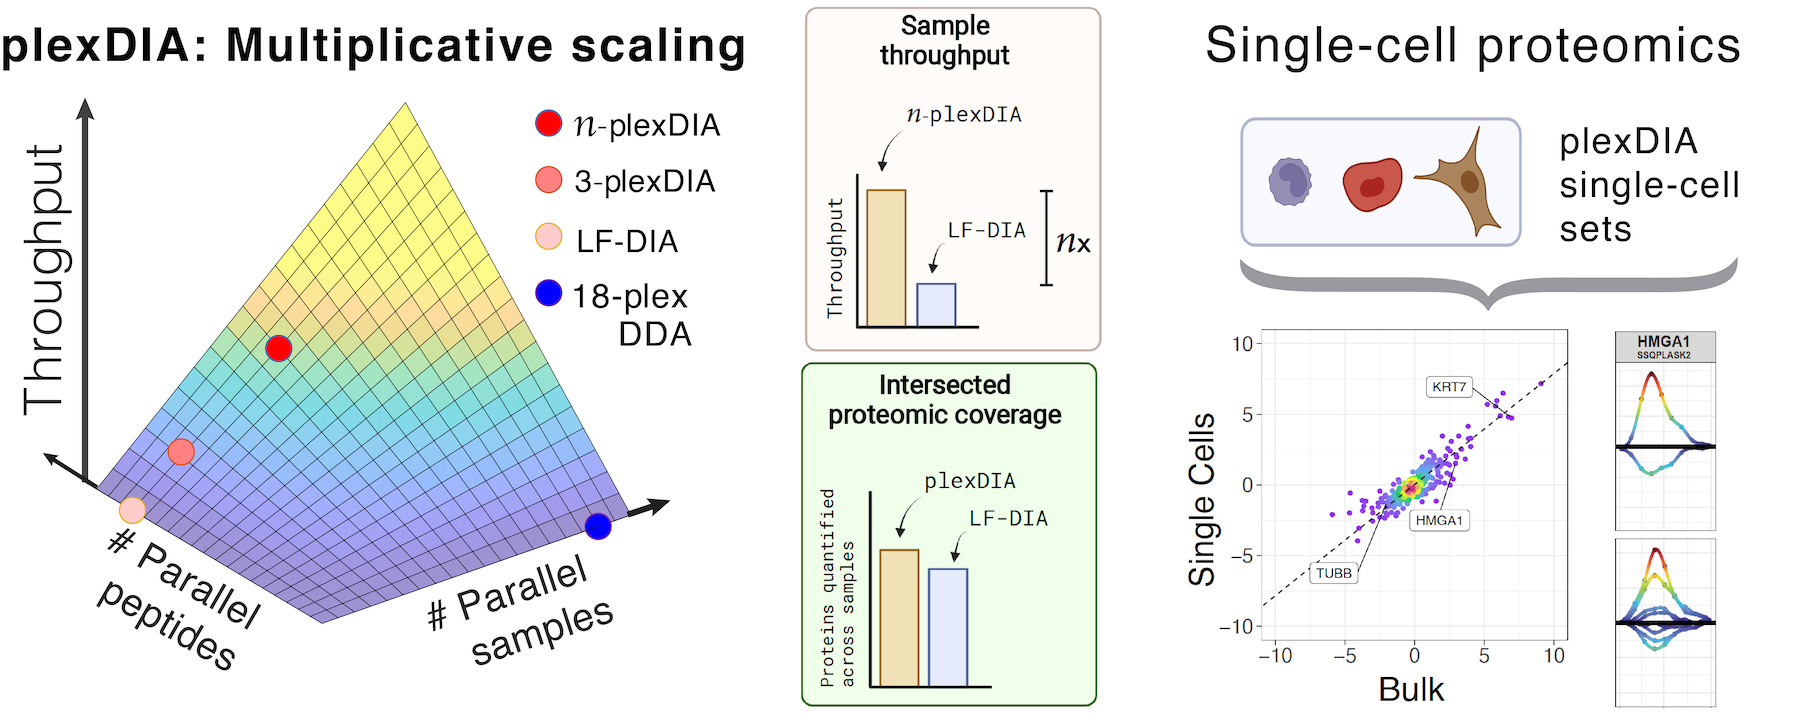 Single-cell proteomics by Mass-spec